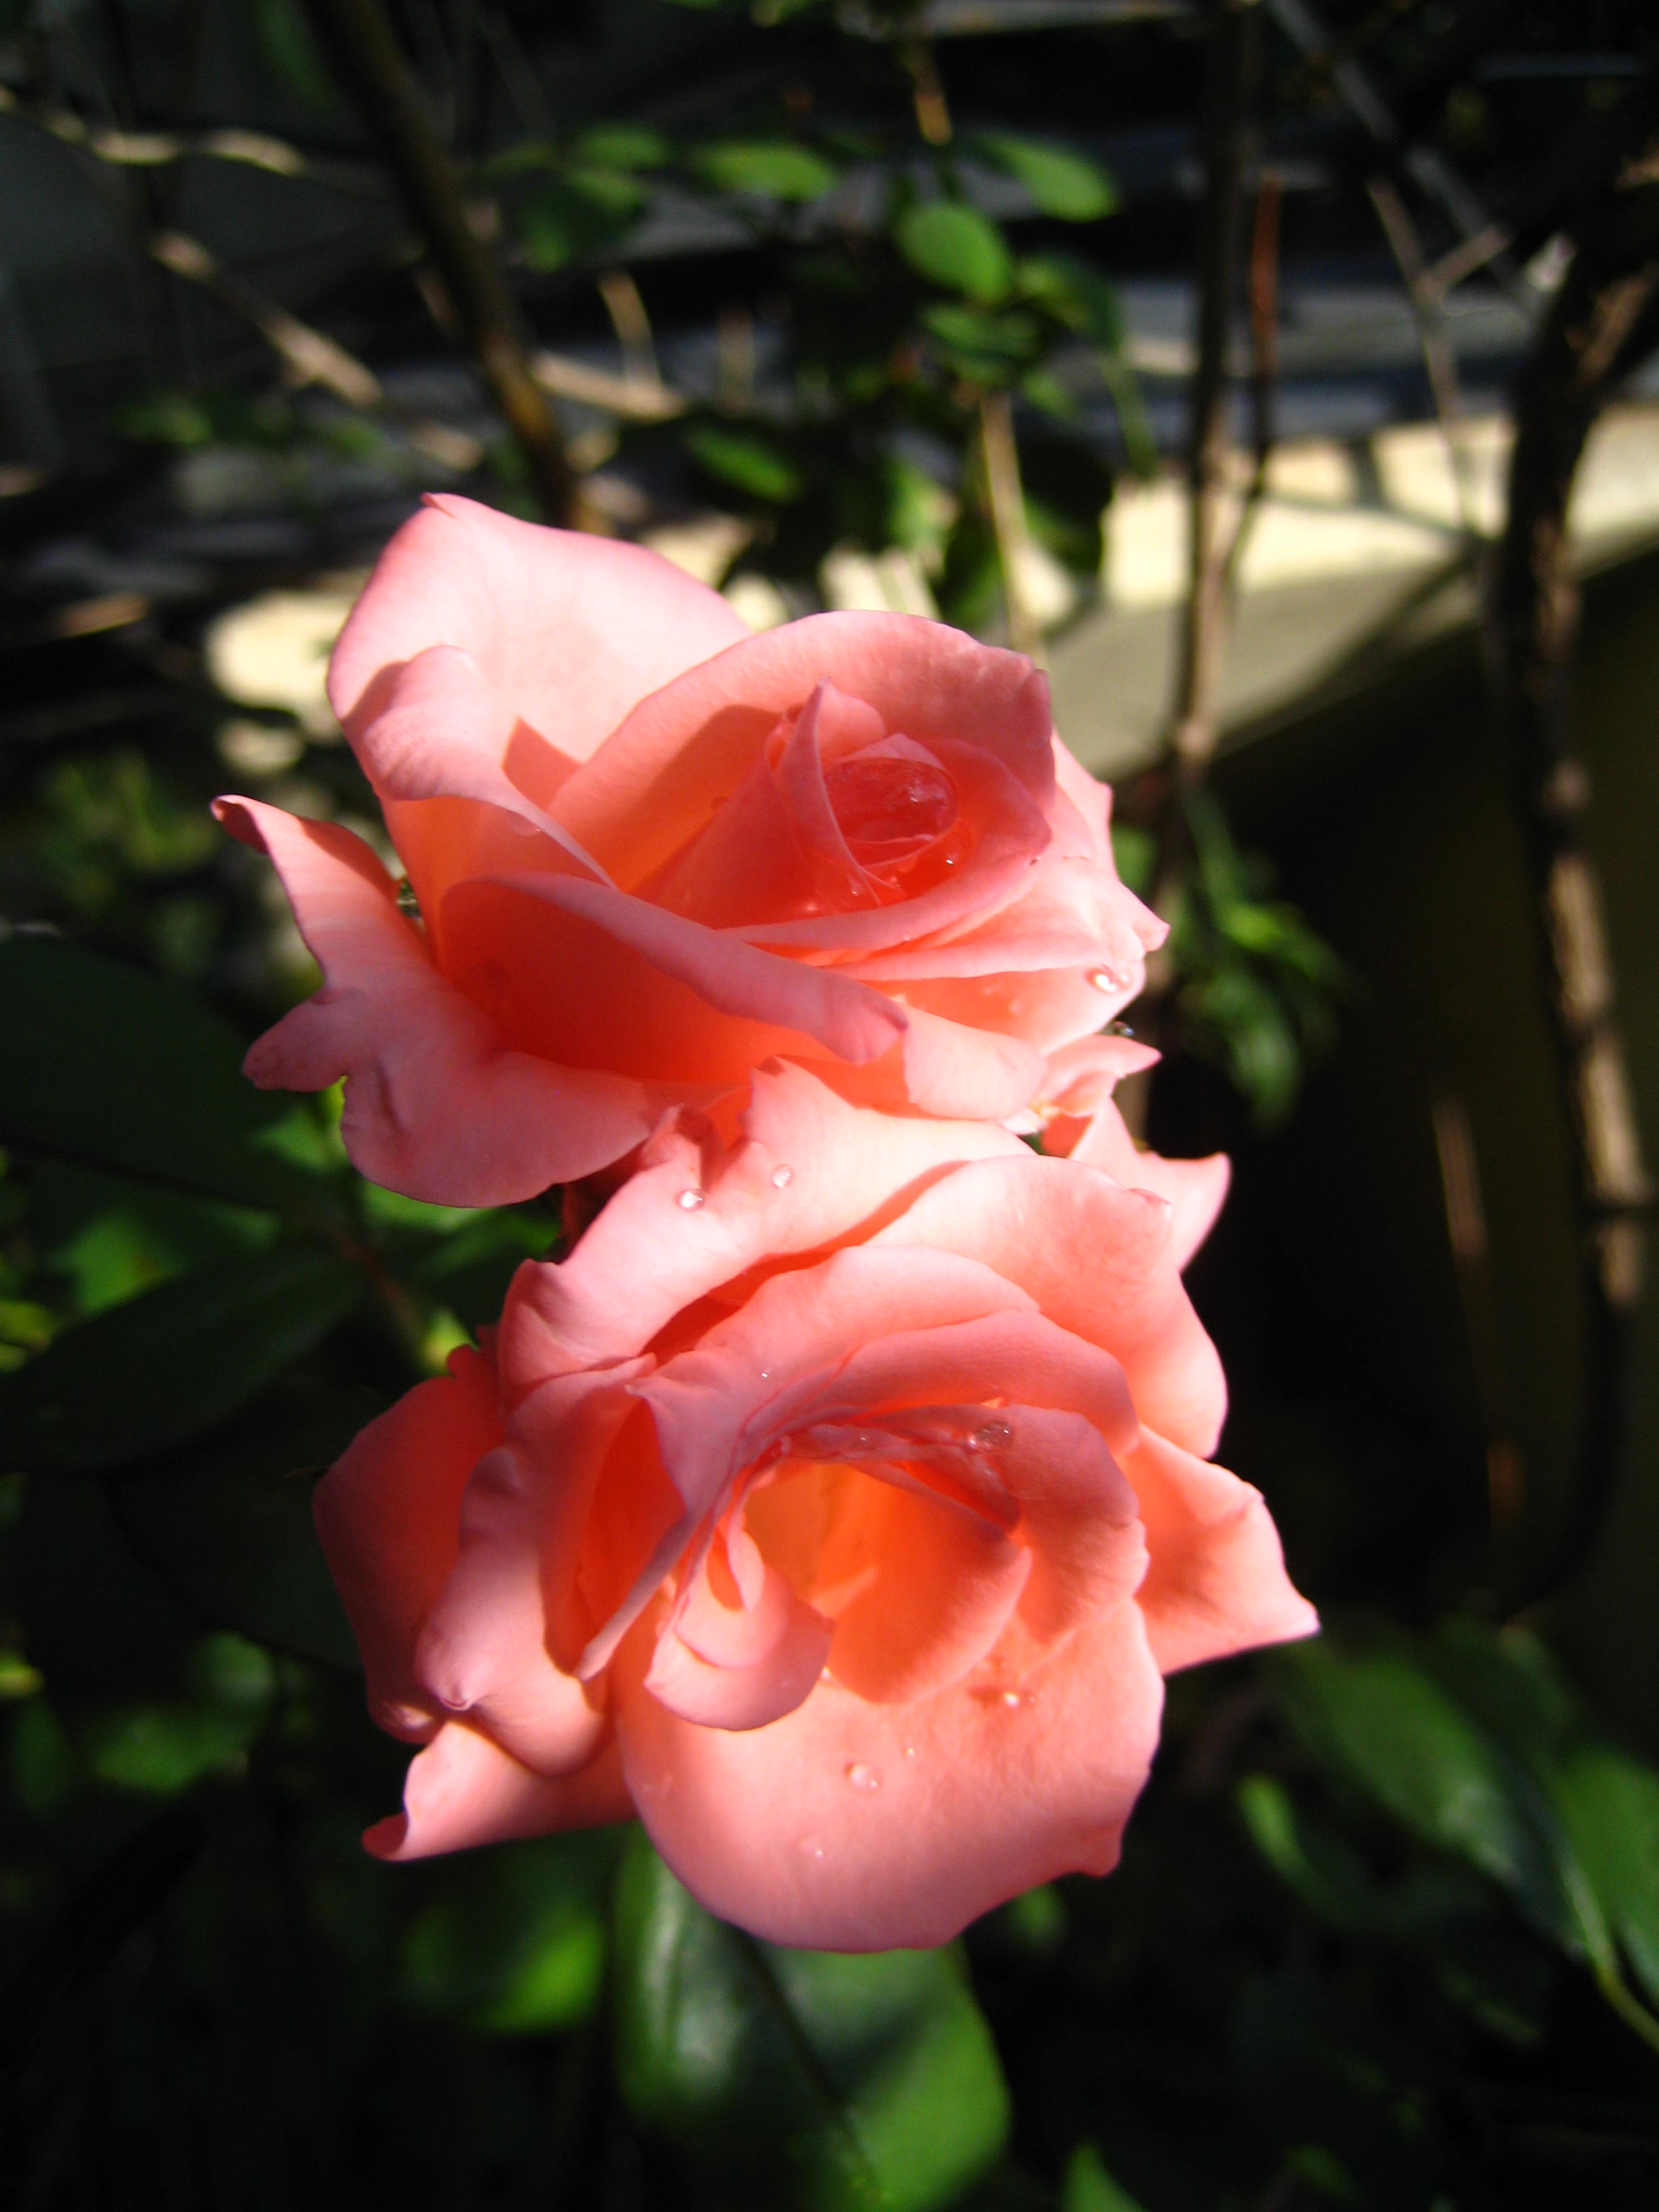 File:Two roses from one stem.JPG - Wikimedia Commons